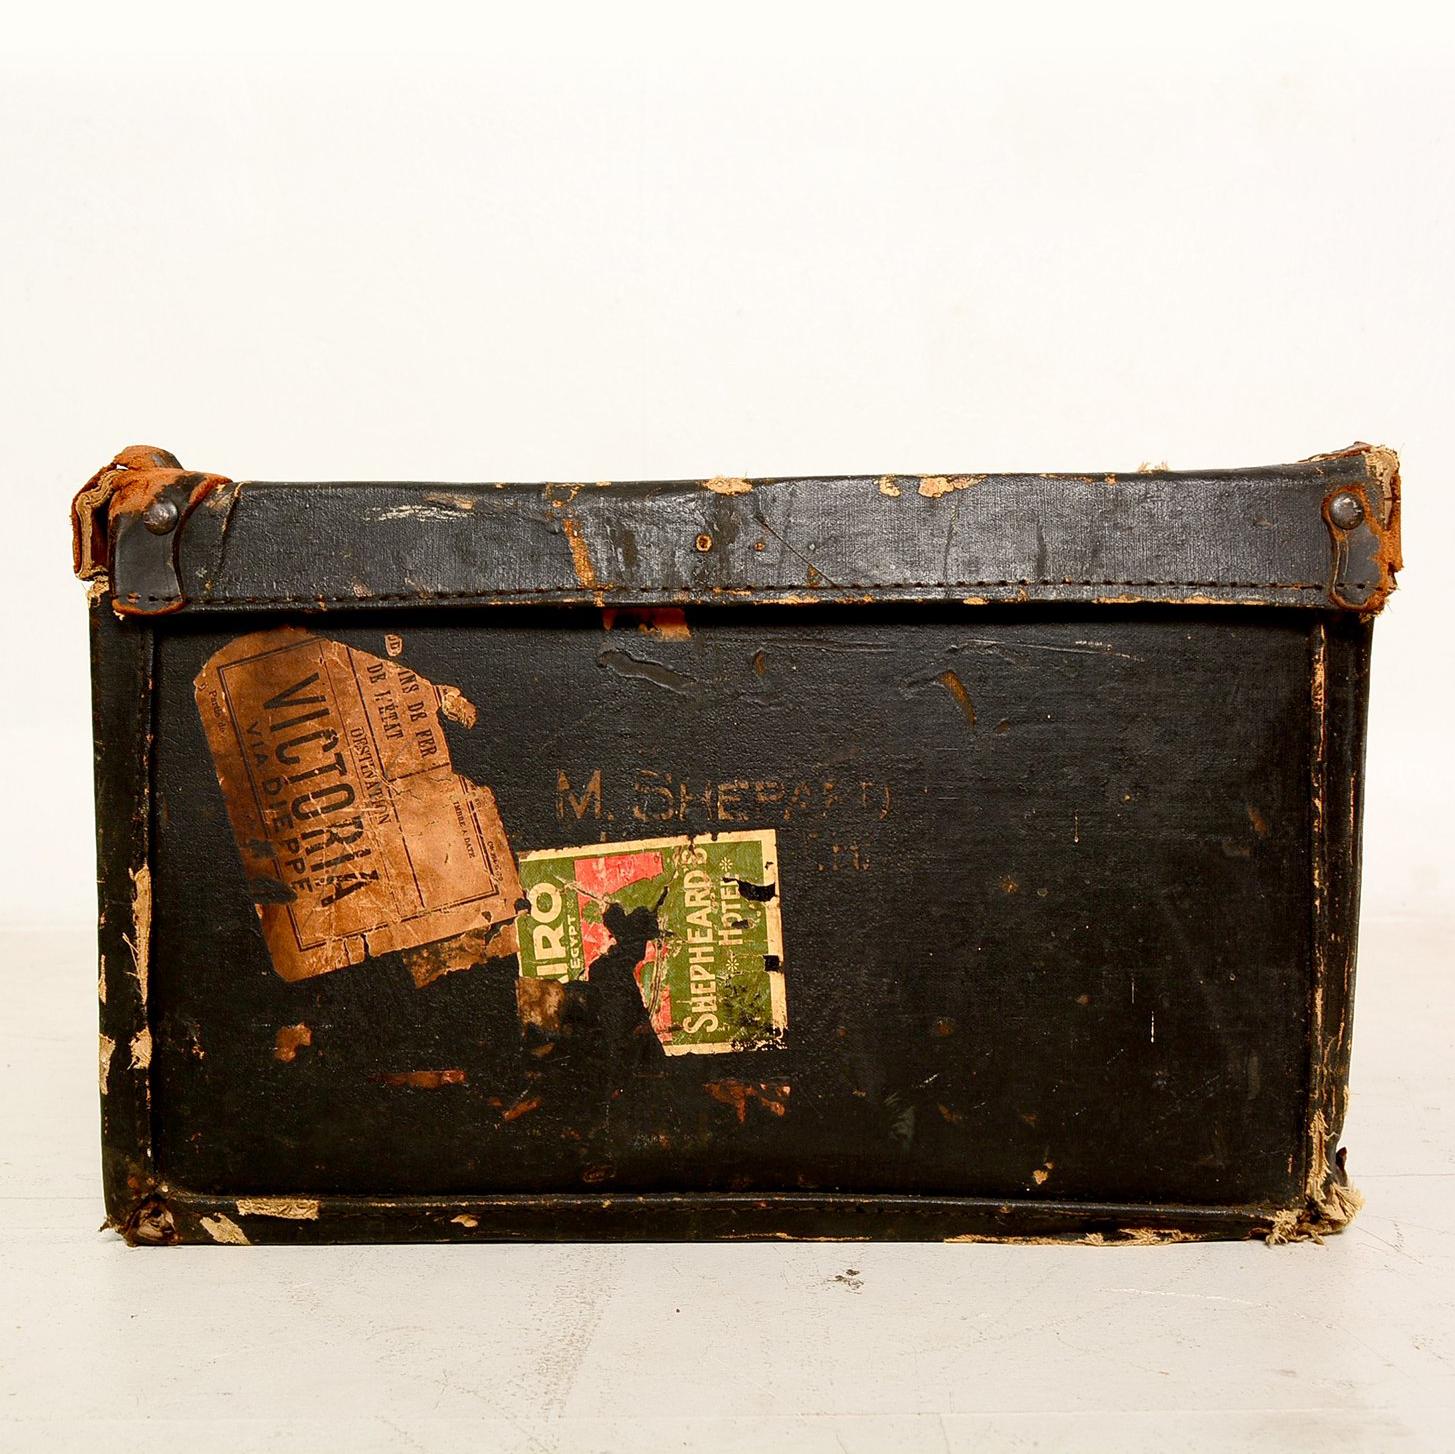 For your consideration a distressed travel case in black canvas and leather accent/ handles. 

It has some serial numbers on the back: 18-291.
On the sides have the print: 